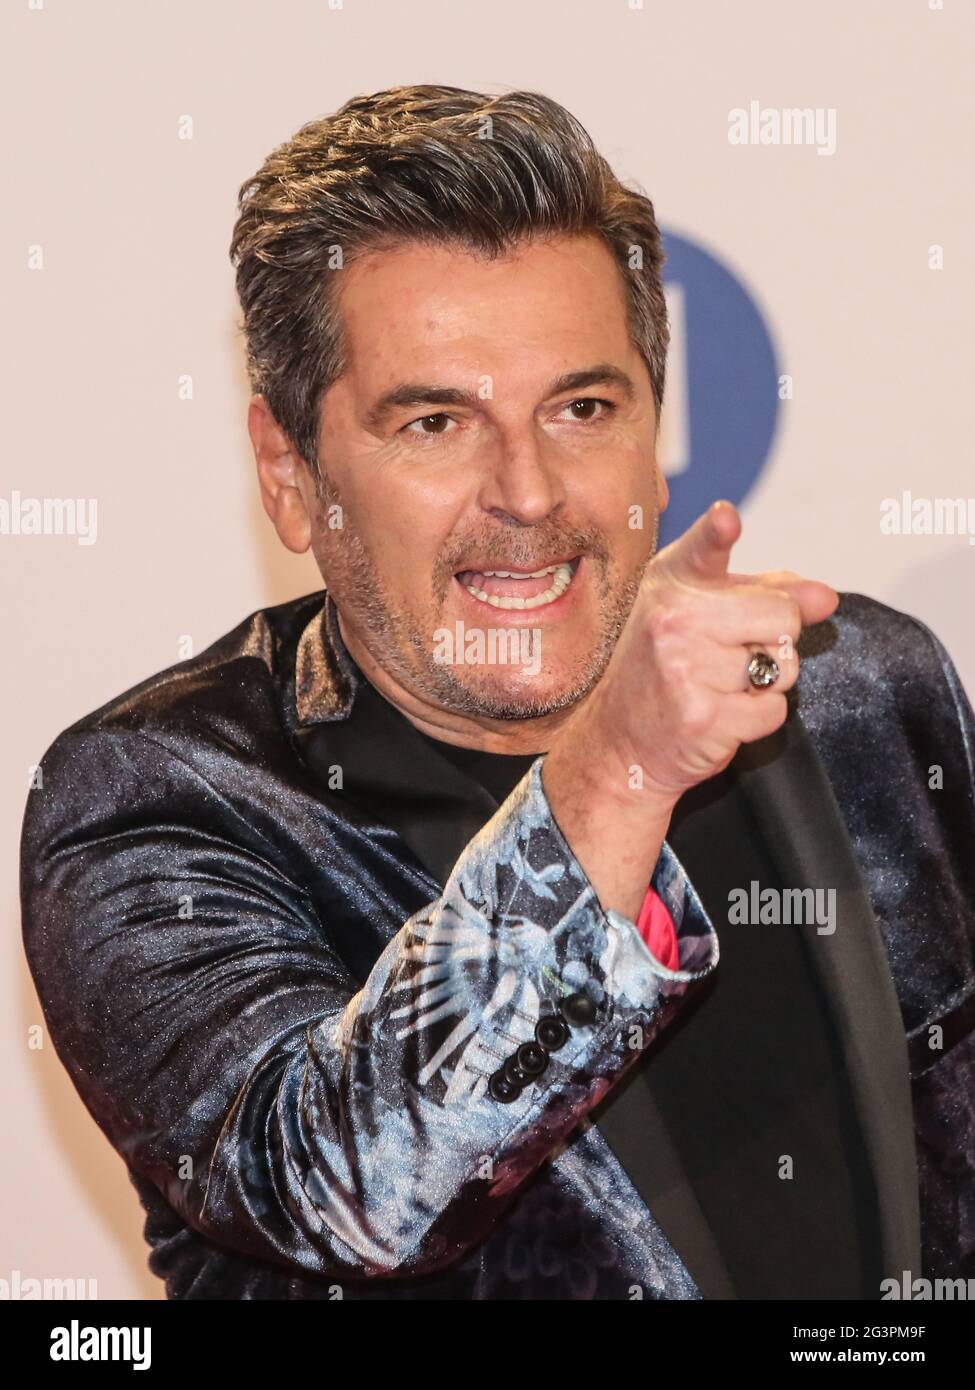 German pop singer Thomas Anders at ARD TV show Schlagerchampions 2020 on  11.01.2020 in Berlin Stock Photo - Alamy